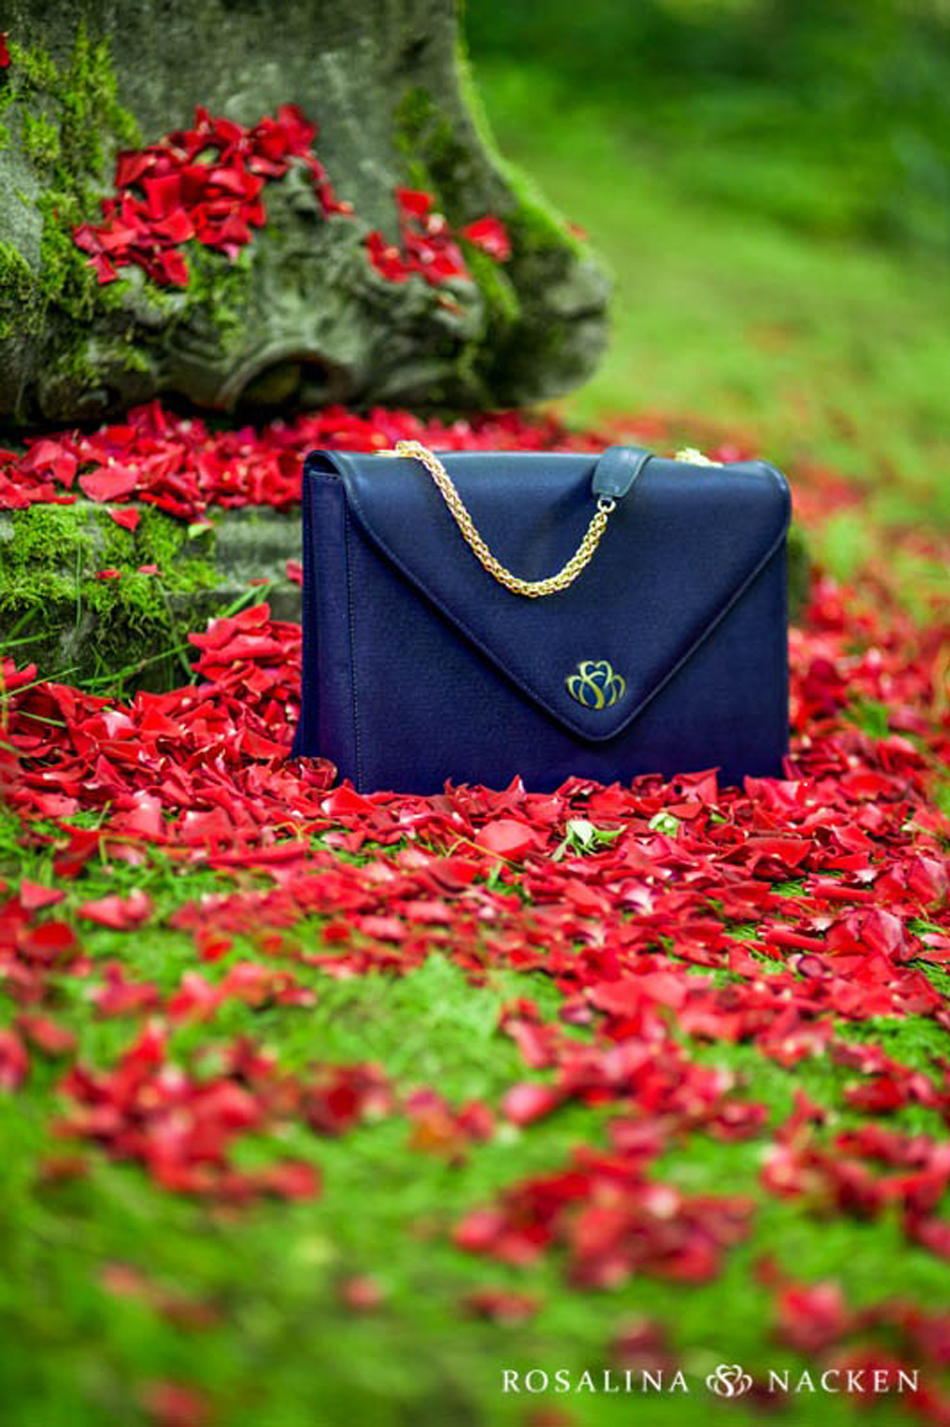 The Shelle Classica; paving the way for women to strive in their careers while exuding elegance and stylish taste.